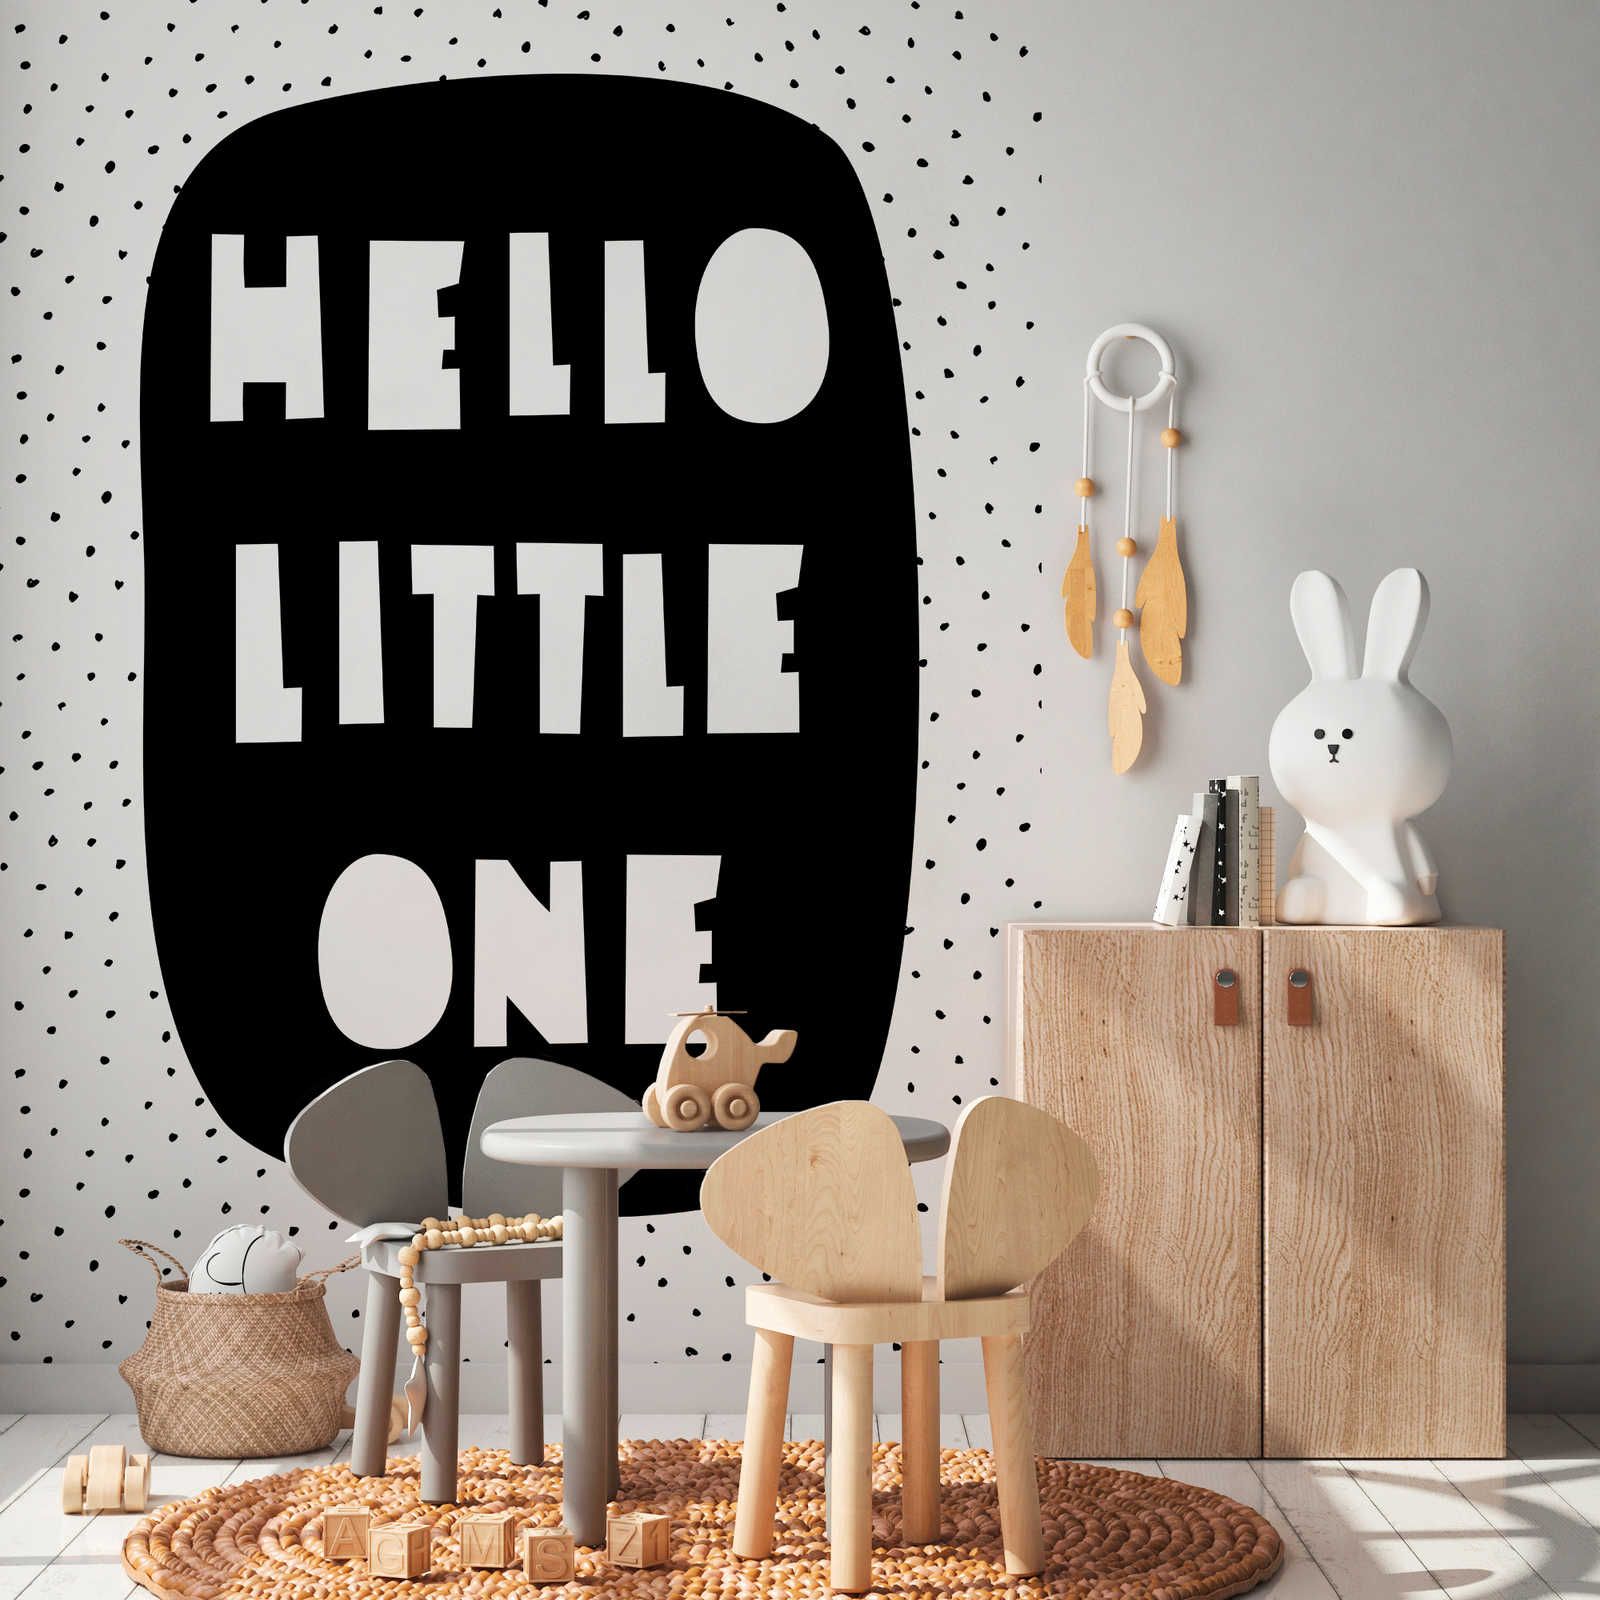 Photo wallpaper for the children's room with "Hello Little One" lettering - textured non-woven
